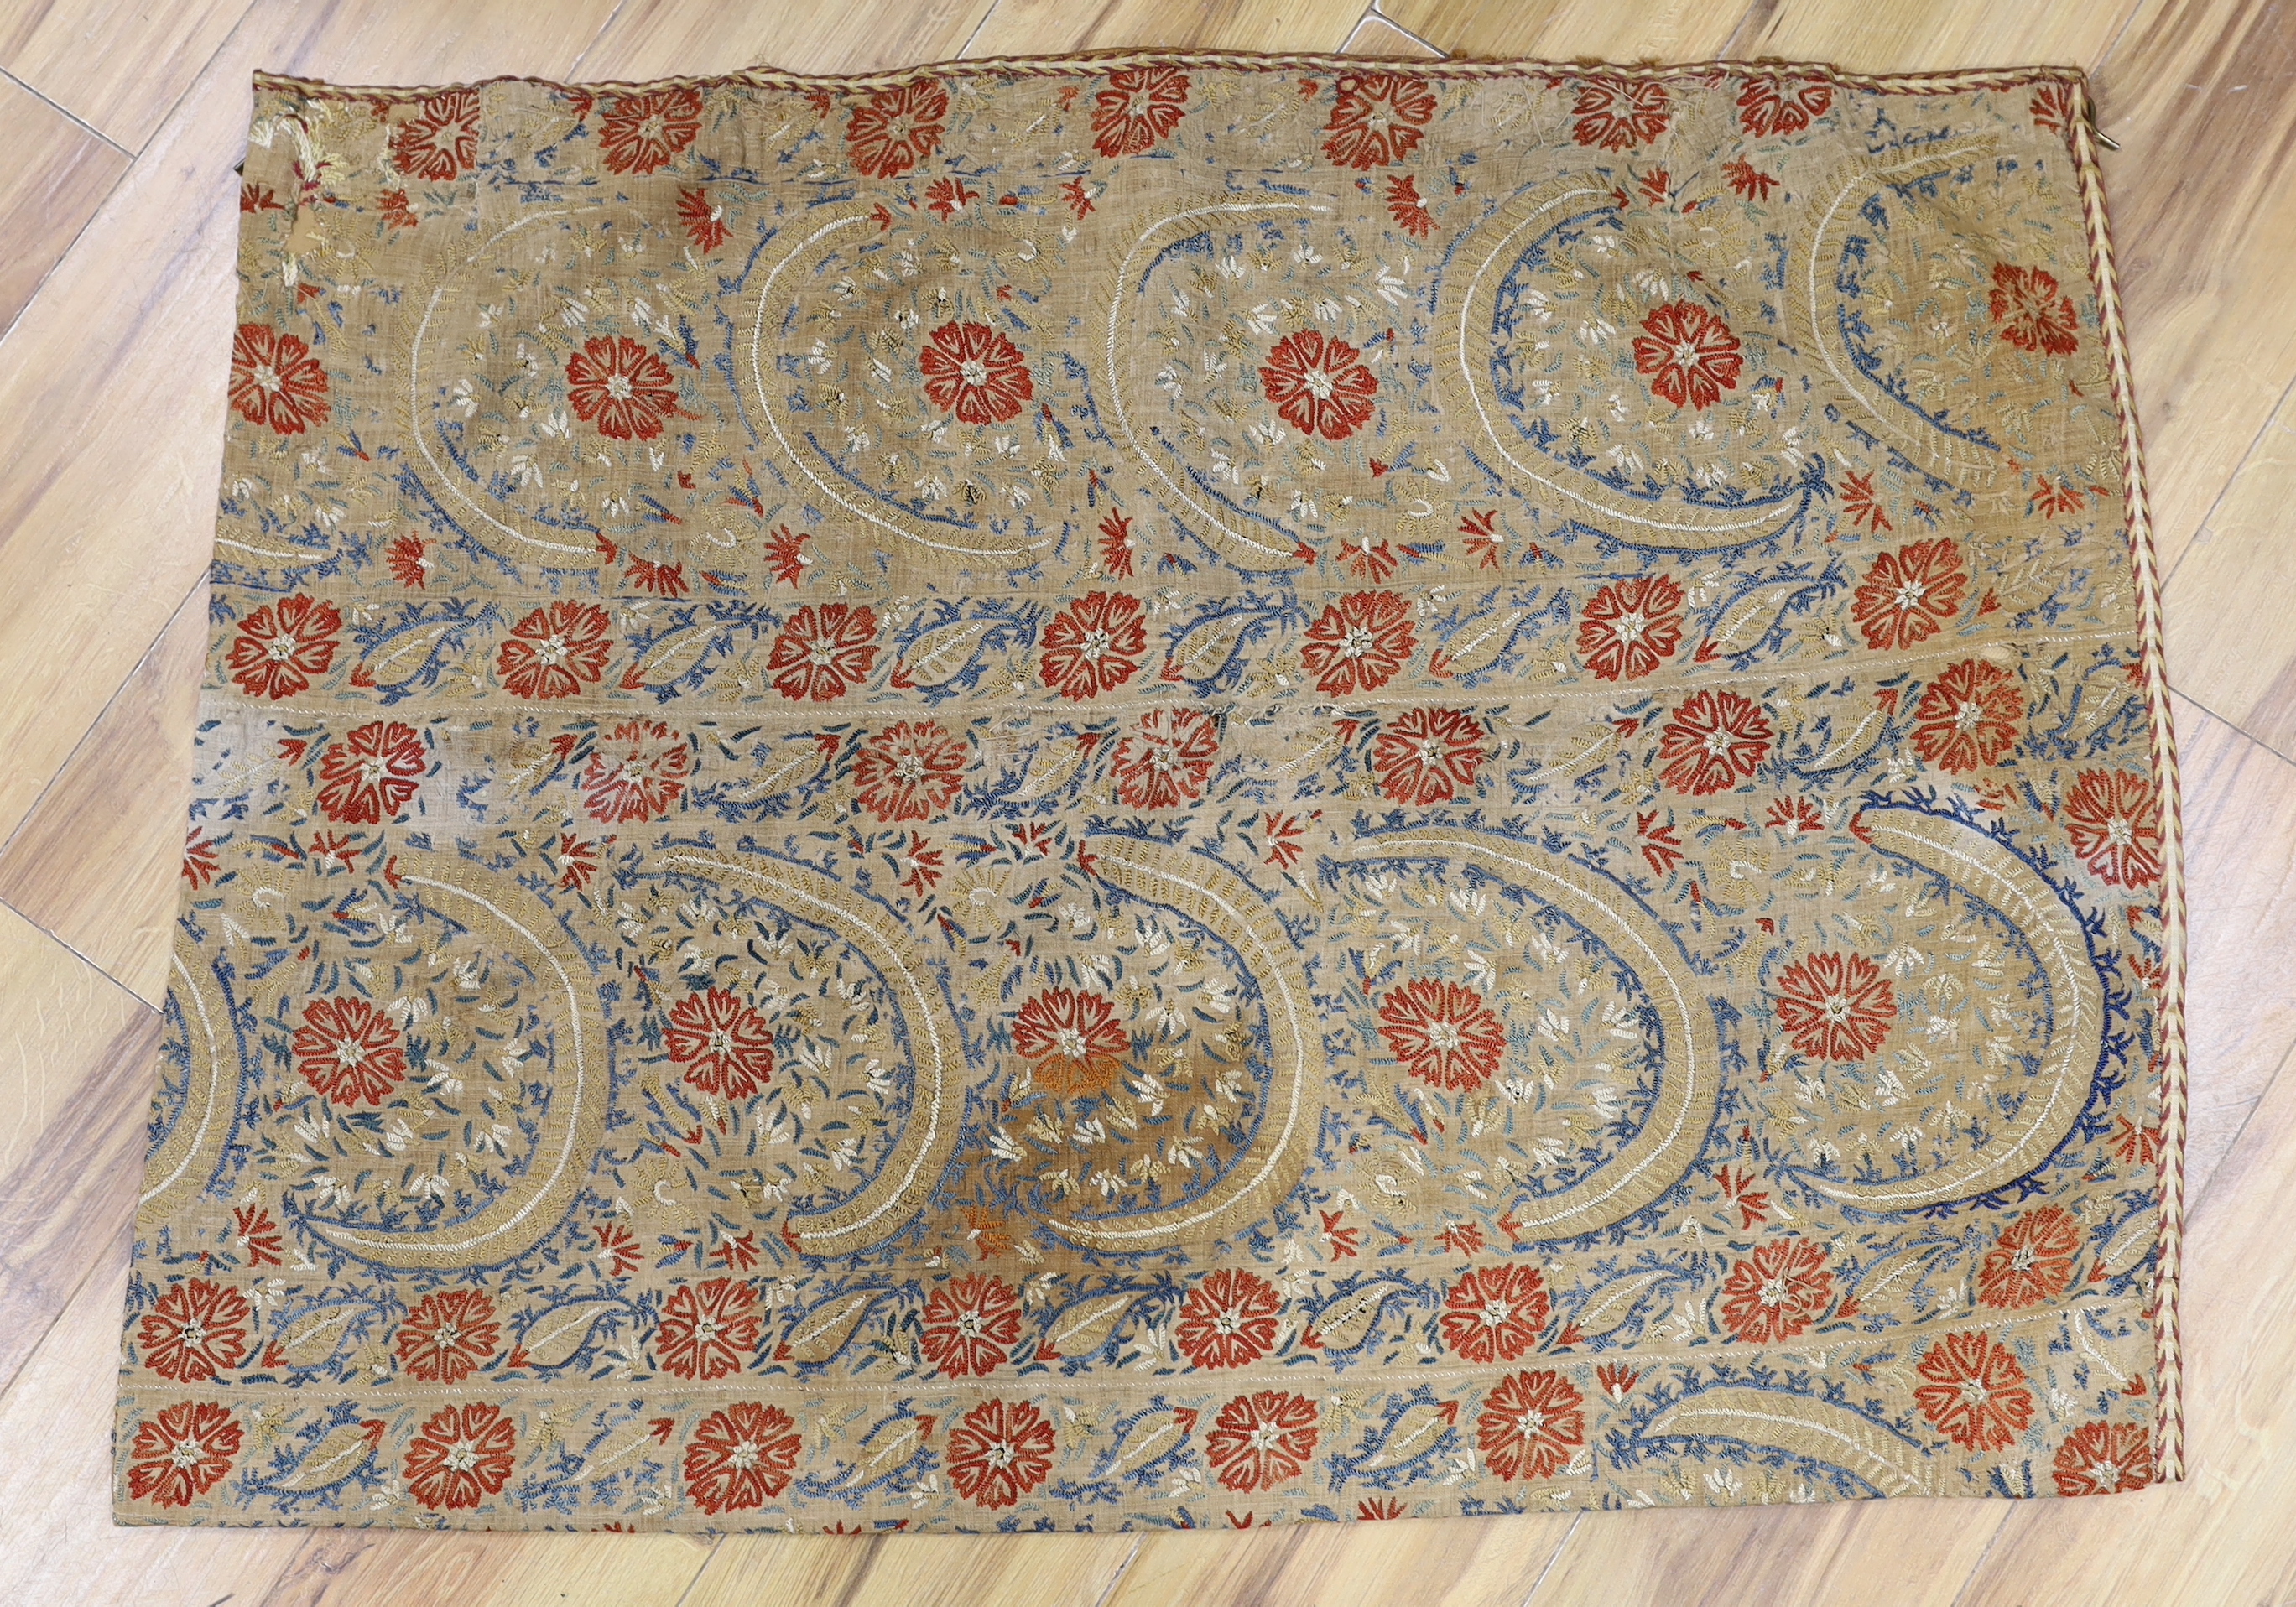 An Indian embroidered panel, a small linen embroidered panel possibly Turkish, a maroon silk length of fabric, heavily embroidered with all over flower motifs, possibly cut from a sari, together with a handwoven linen em